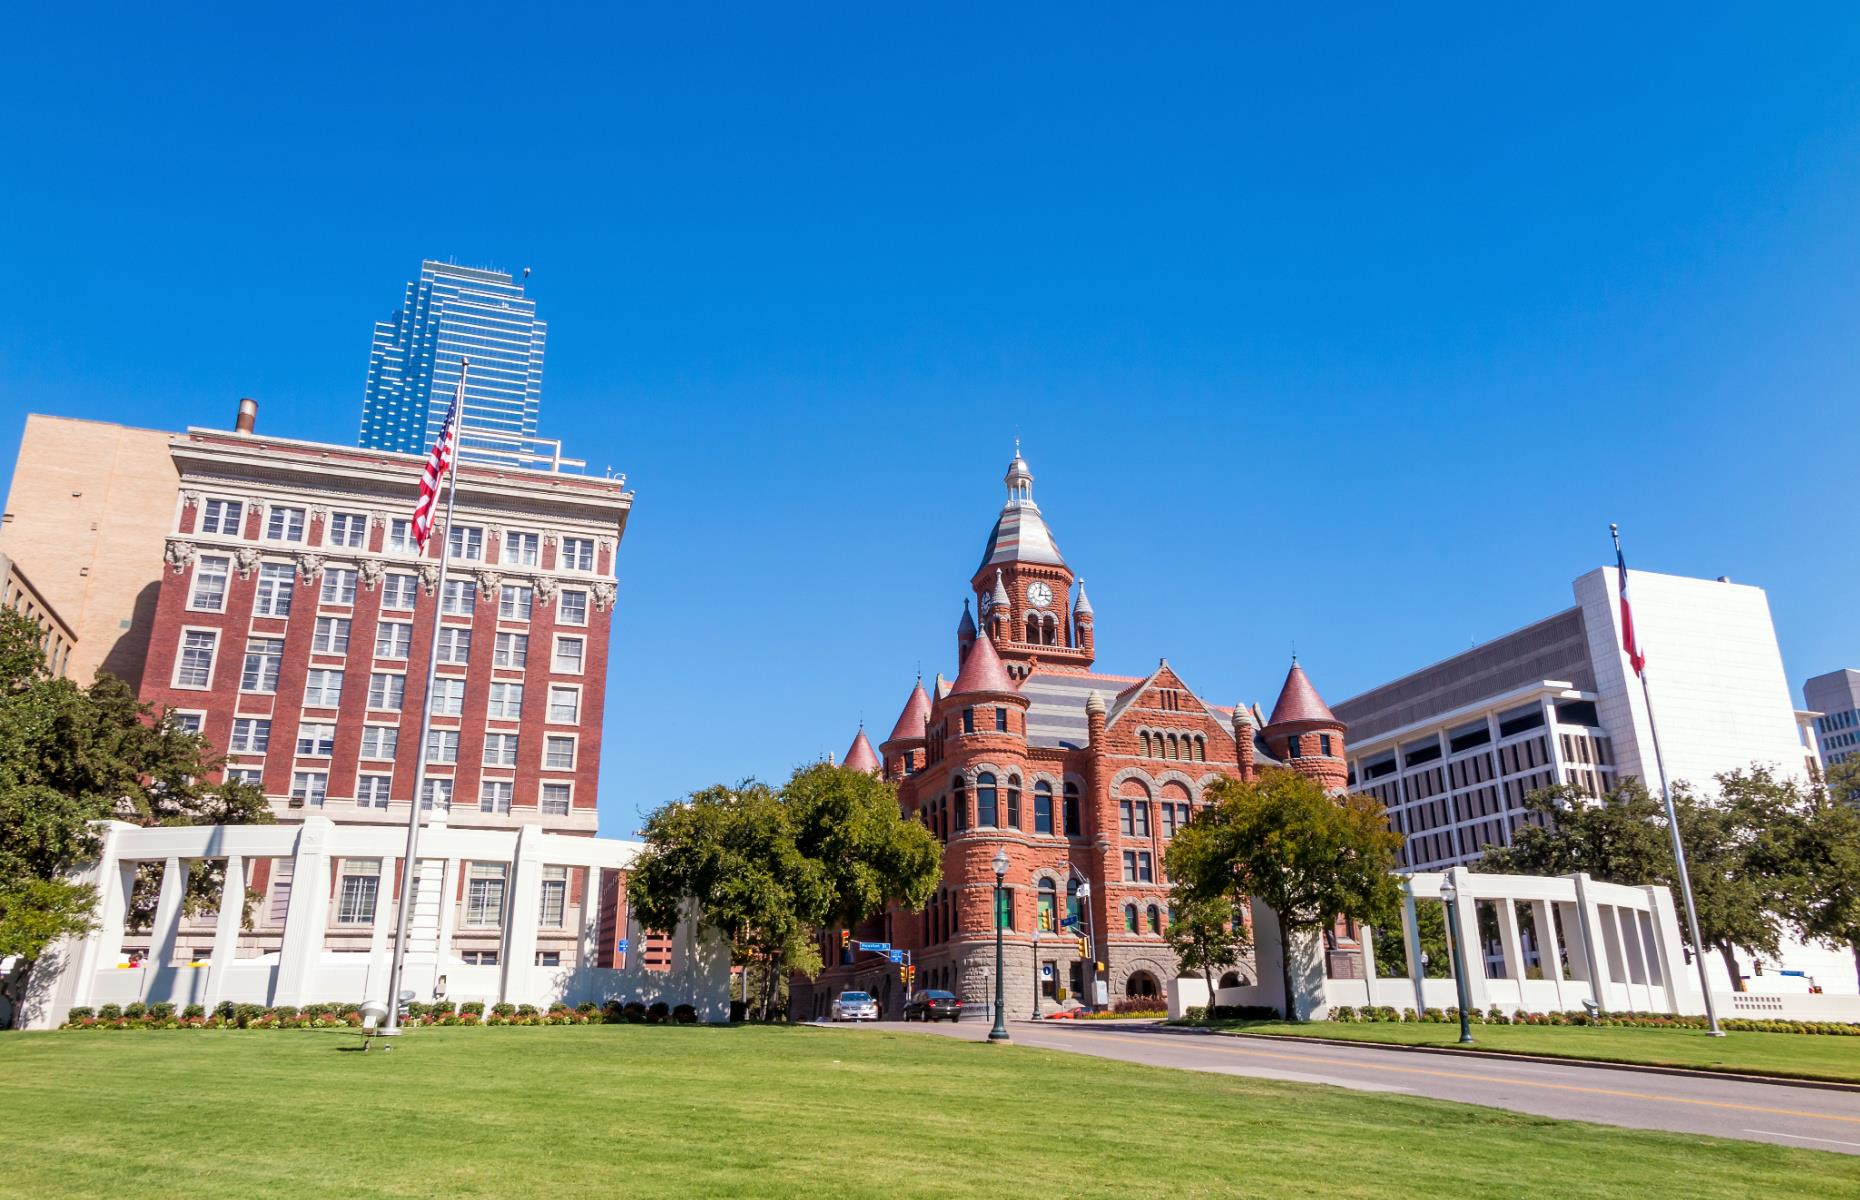 <p>Dallas’s Dealey Plaza would be a landmark under any circumstances – the urban space marks the site of some of the first buildings in Dallas and the plaza itself was constructed in 1940. But it’s also the site of one of the <a href="https://www.jfk.org/the-assassination/history-of-dealey-plaza/">most dramatic and tragic moments in US history</a>: the assassination of President John F. Kennedy. The President was shot from the Texas Book Depository building on the plaza as his motorcade rolled through the street below.</p>  <p><strong><a href="http://bit.ly/3roL4wv">Love this? Follow our Facebook page for more travel inspiration</a></strong></p>